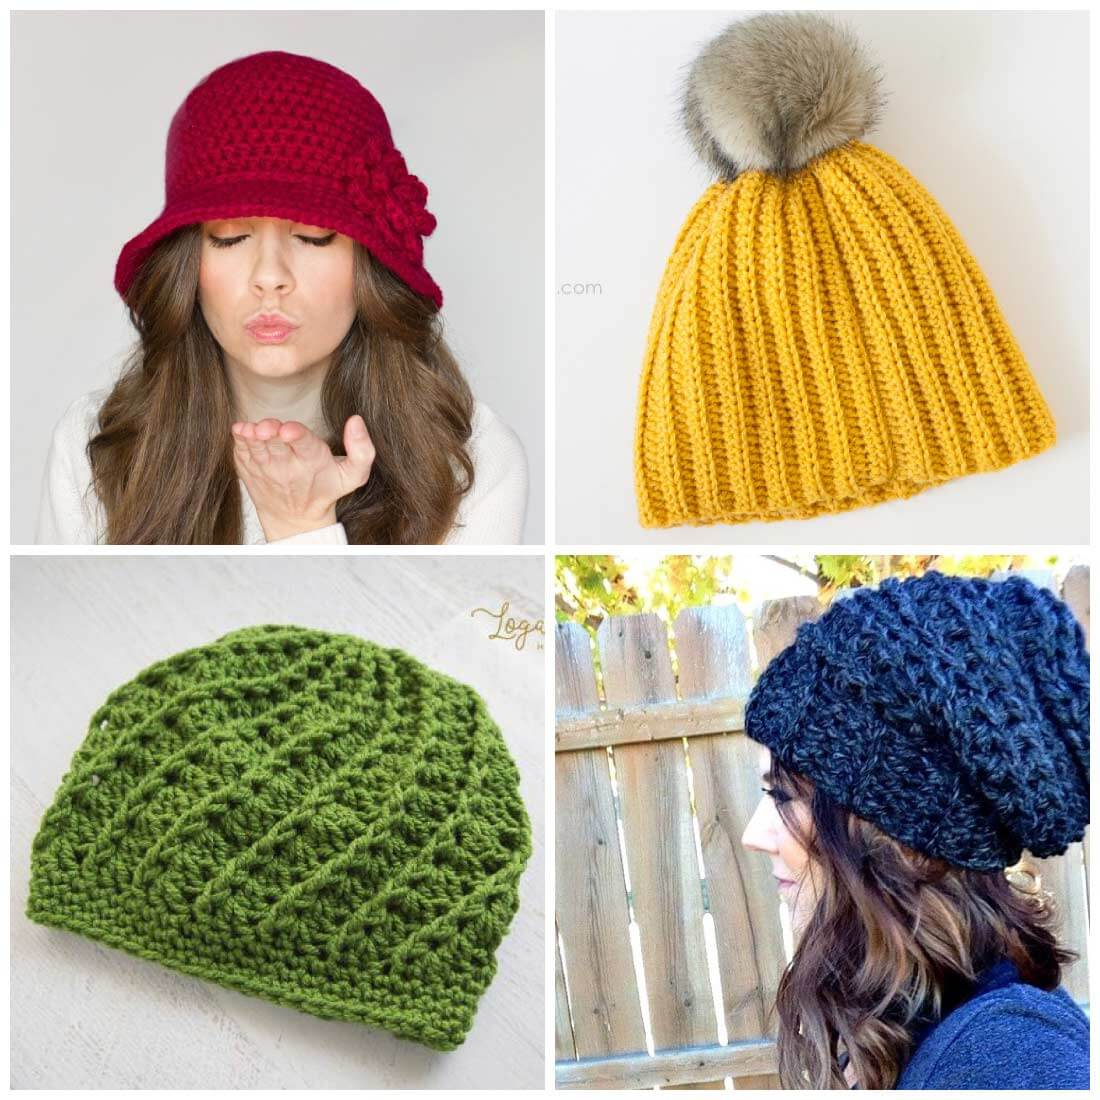 30+ Pretty Picture of Crochet Hat Patterns – topiccraft